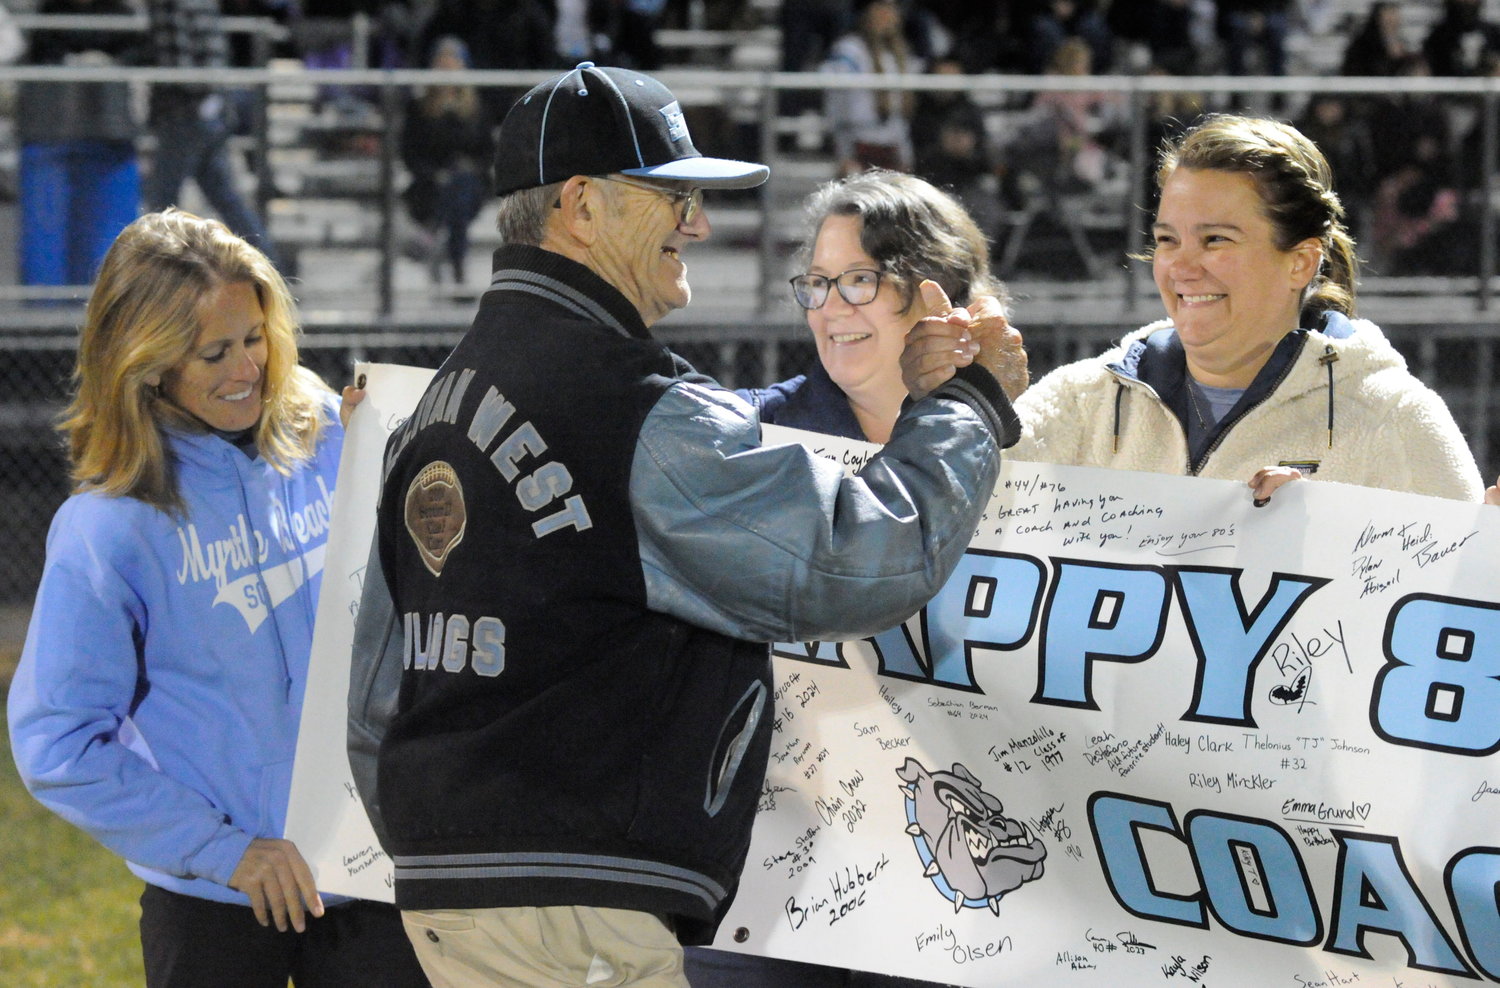 Happy birthday, Coach Bauer. During halftime, coach Ron Bauer was presented with a banner honoring his 80th birthday (which took place on October 18). The banner was signed by hundreds of fans, including players, students (both current and former) and parents.